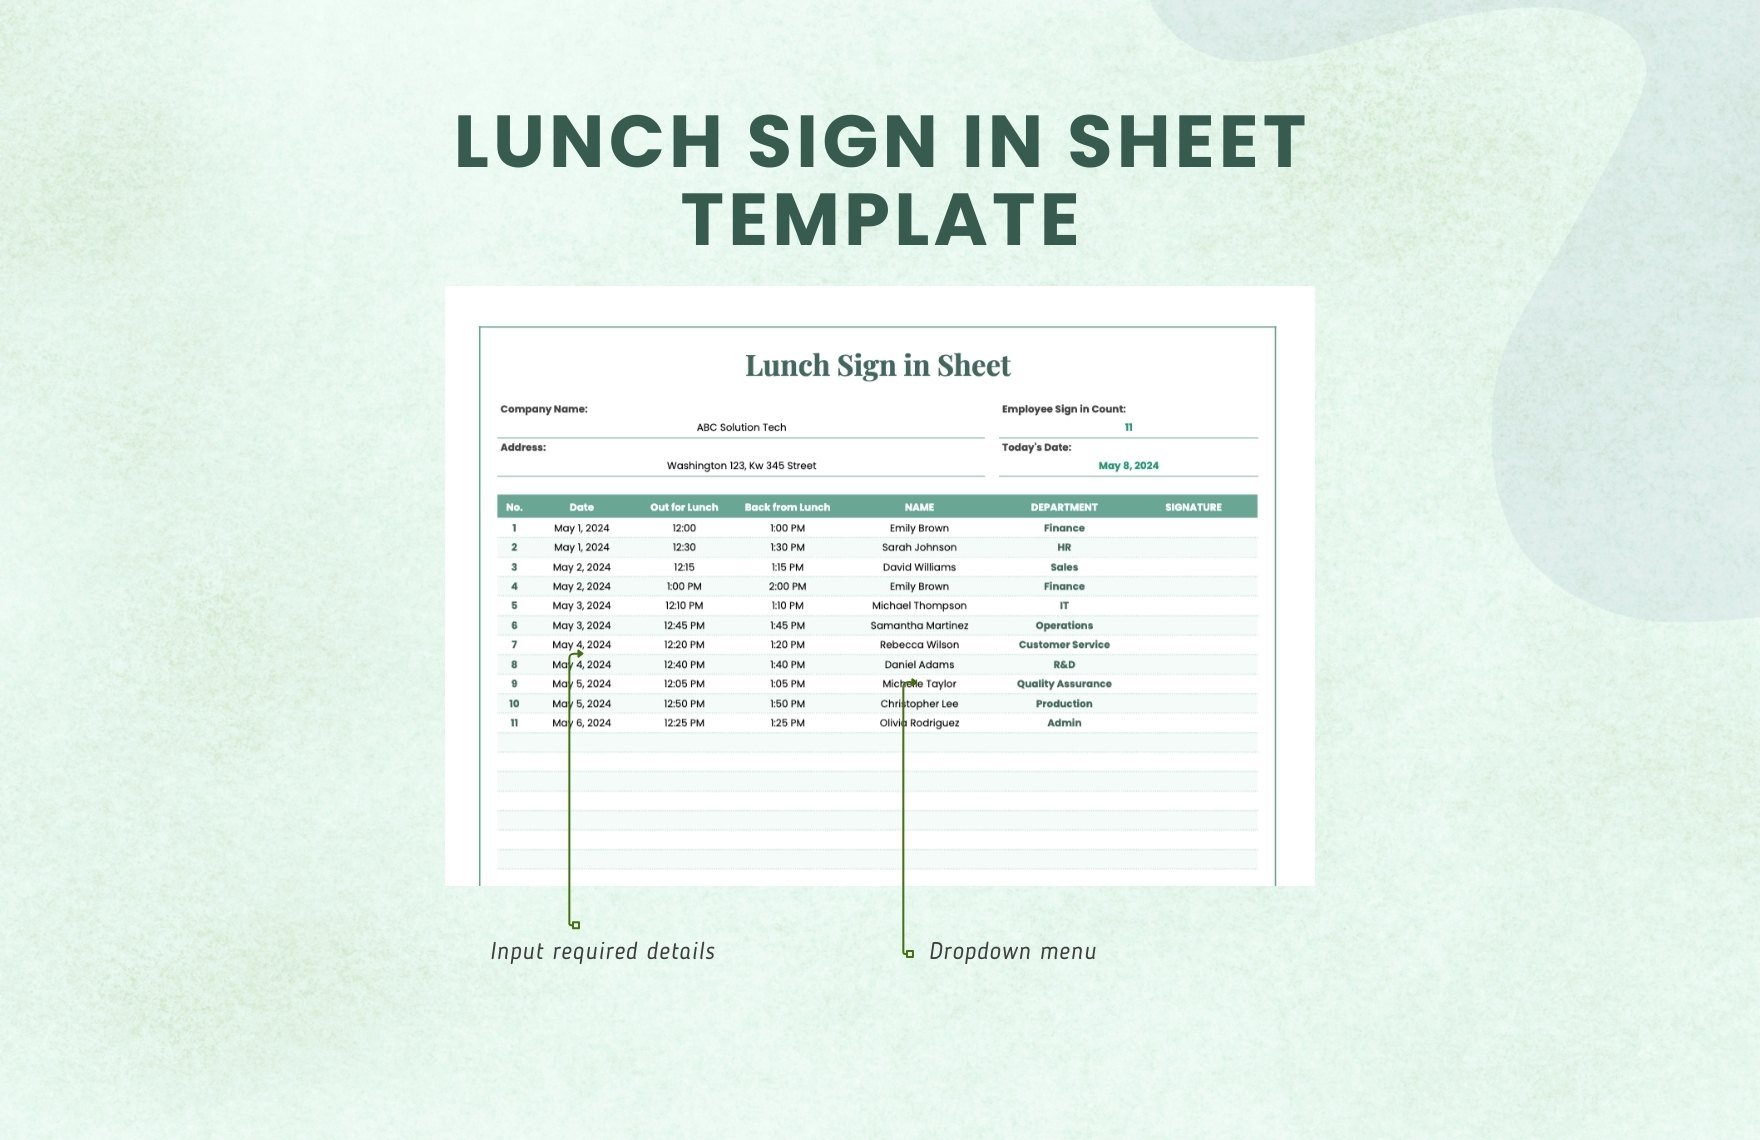 Lunch Sign in Sheet Template